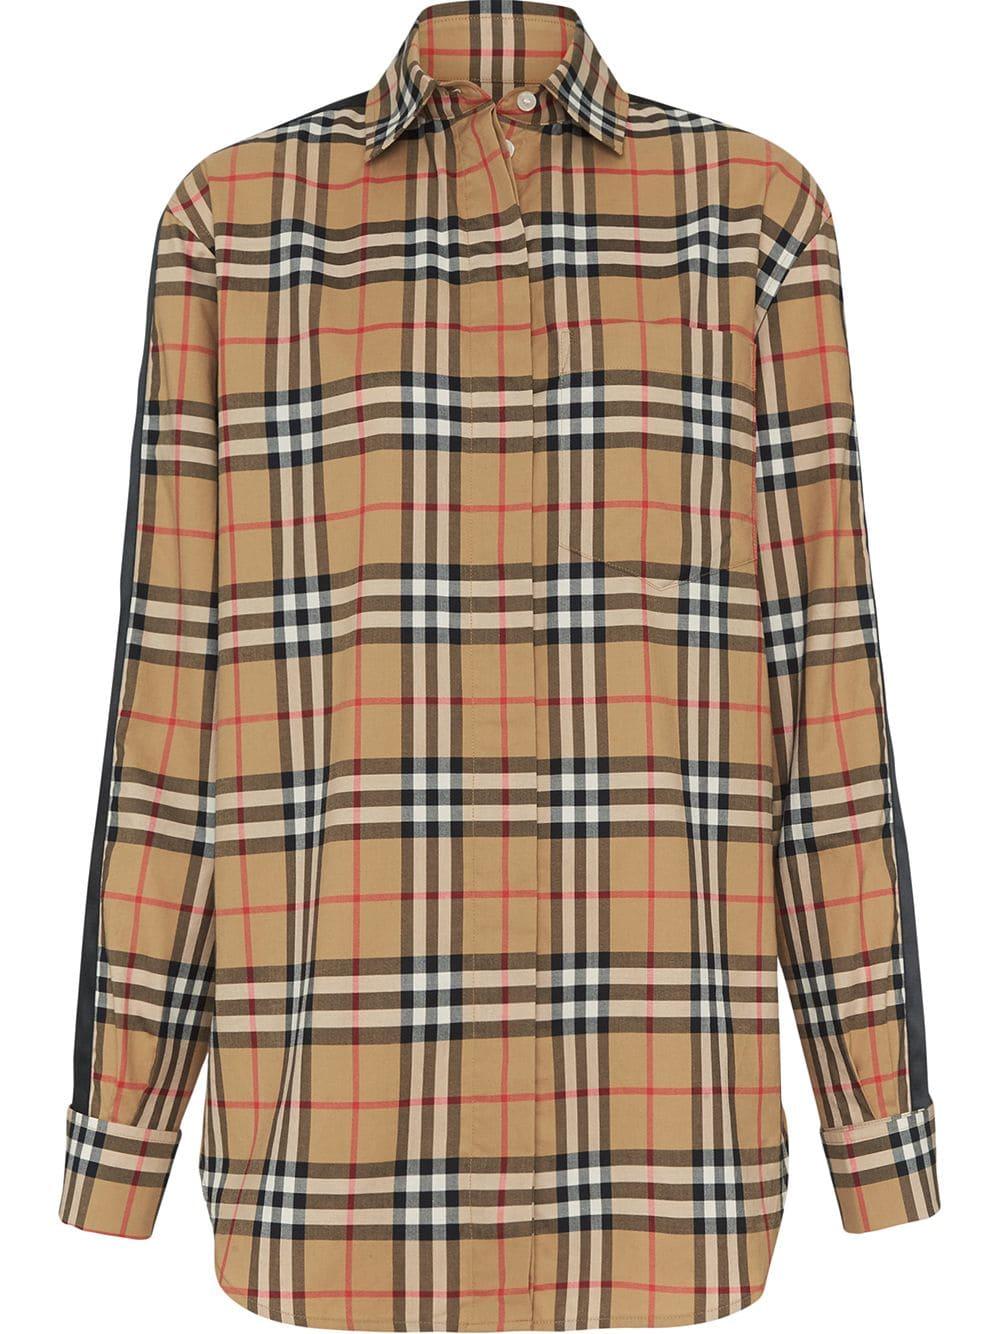 Burberry Satin Stripe Check Shirt in Yellow - Save 43% - Lyst